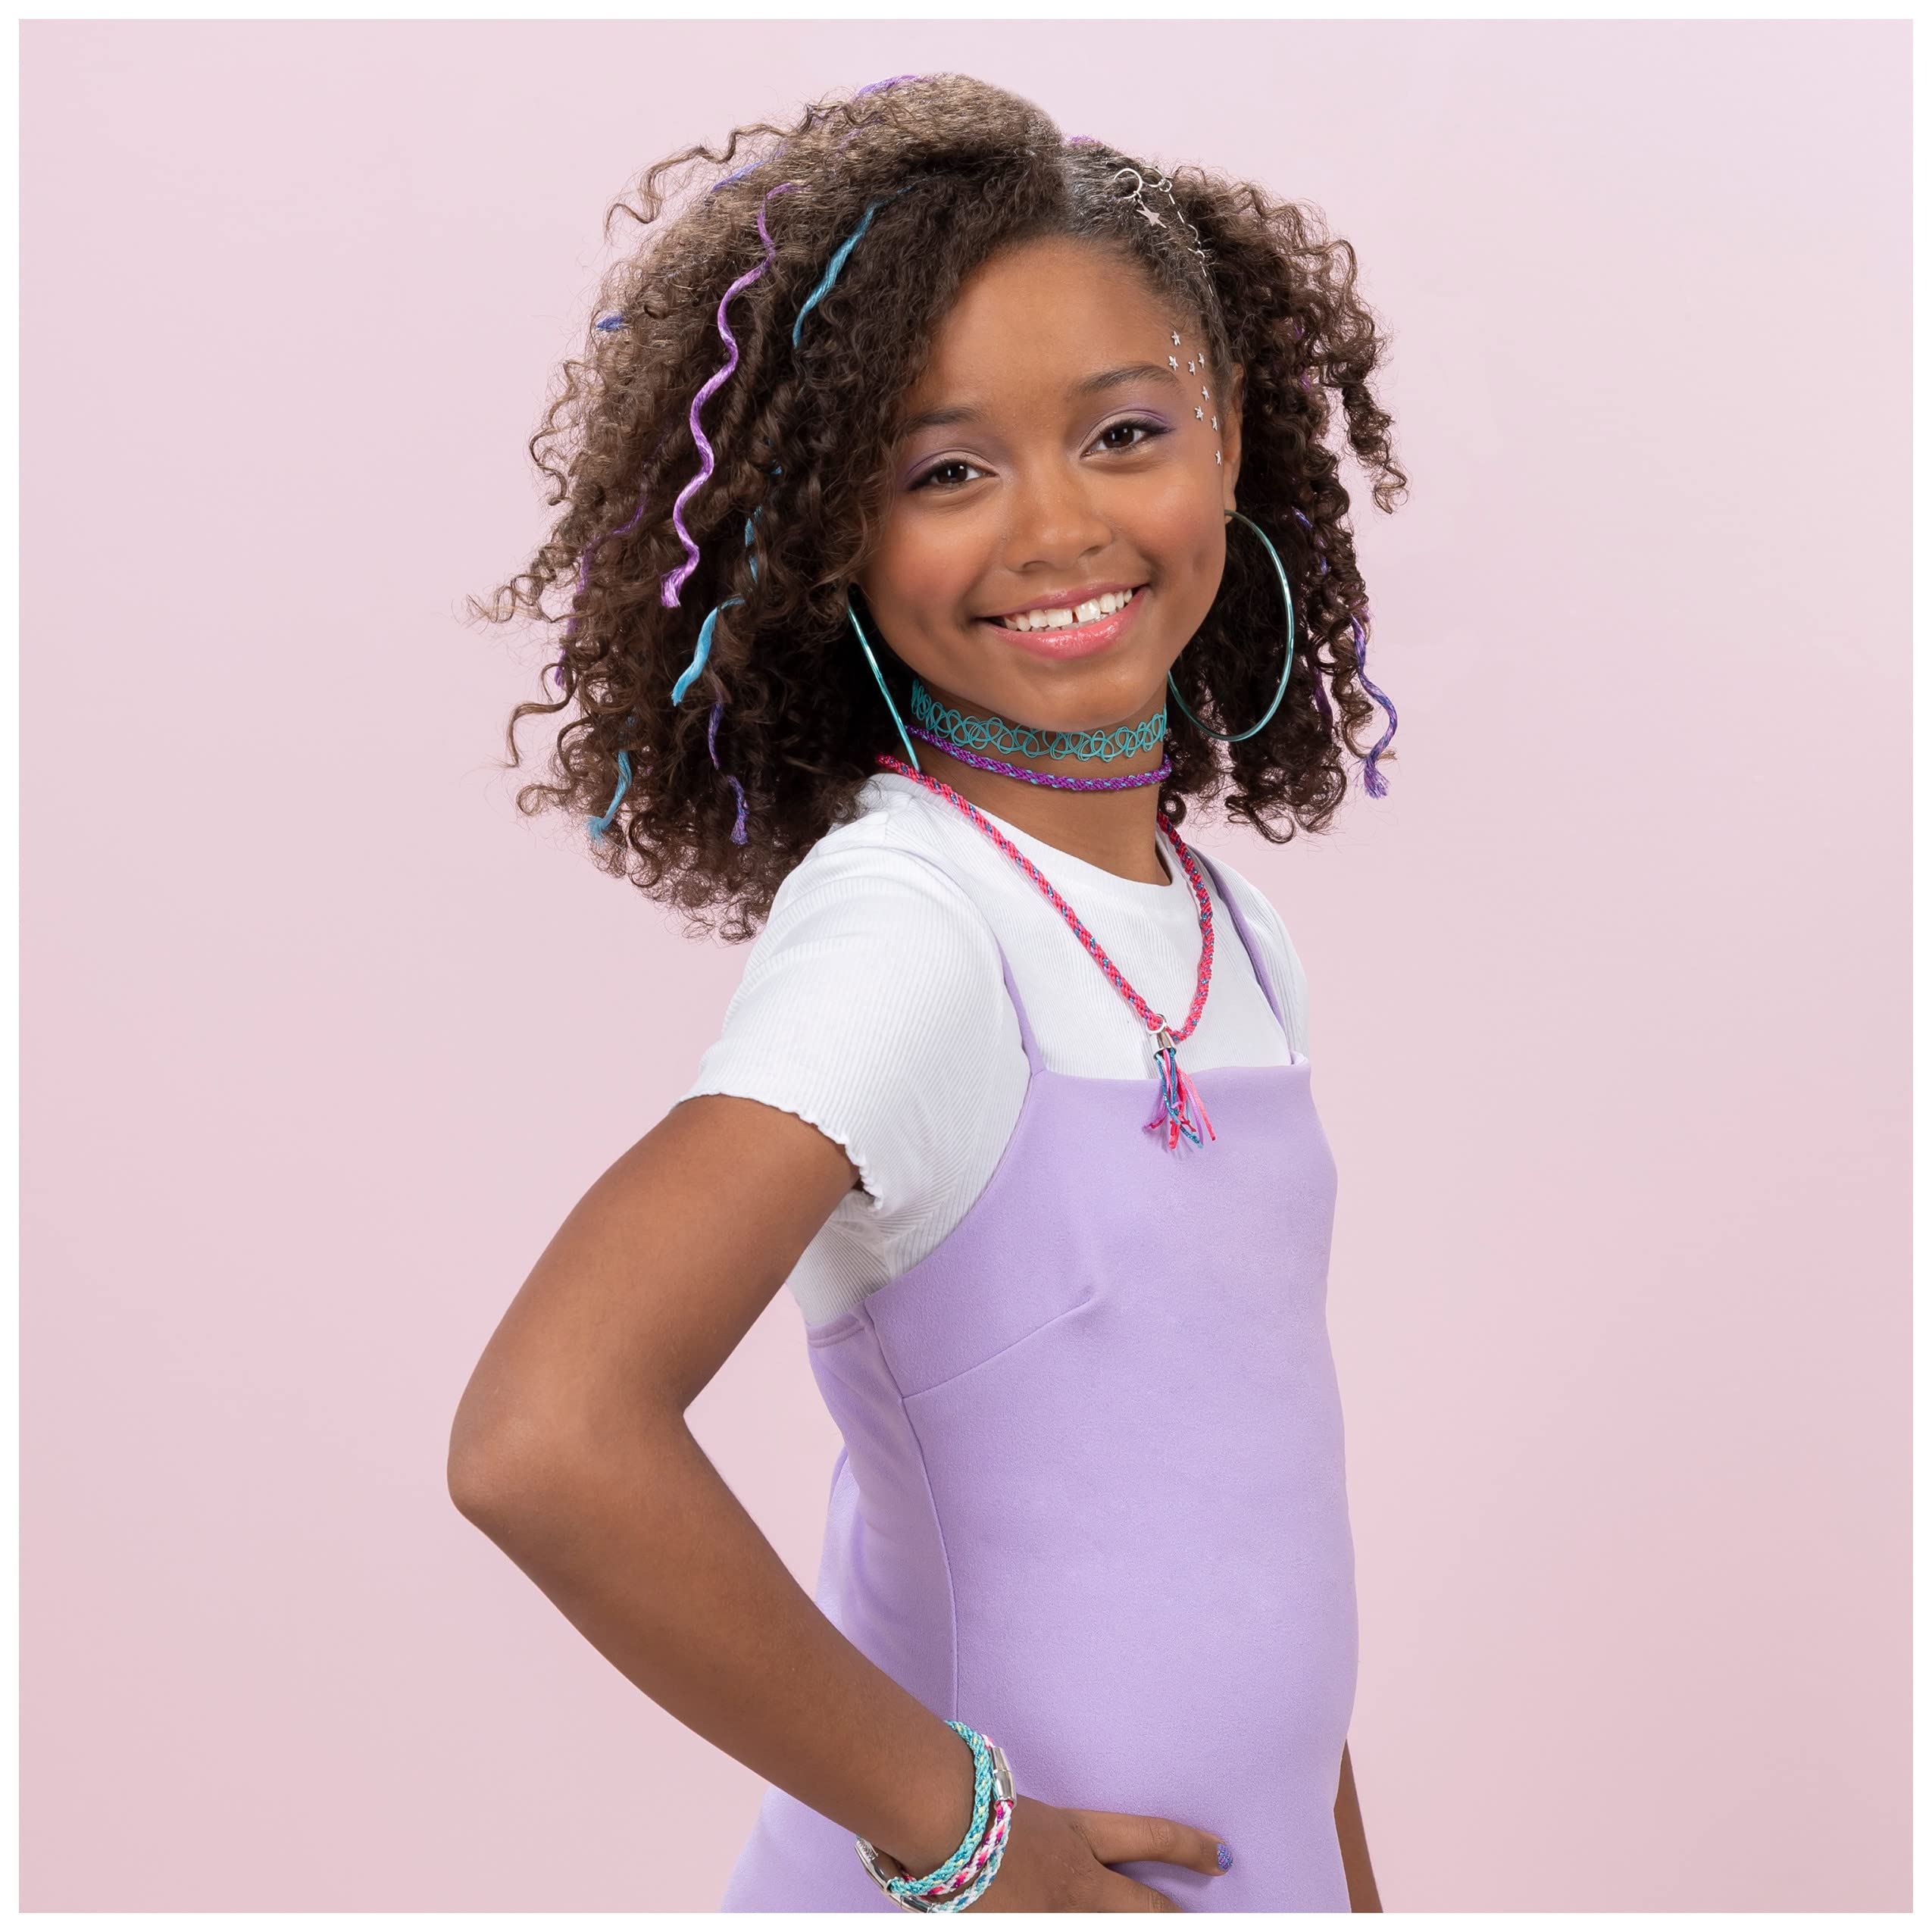 Cool Maker, Hollywood Hair Extension Maker for Girls with 6 Bonus Extensions (18 Total) and Accessories, Amazon Exclusive